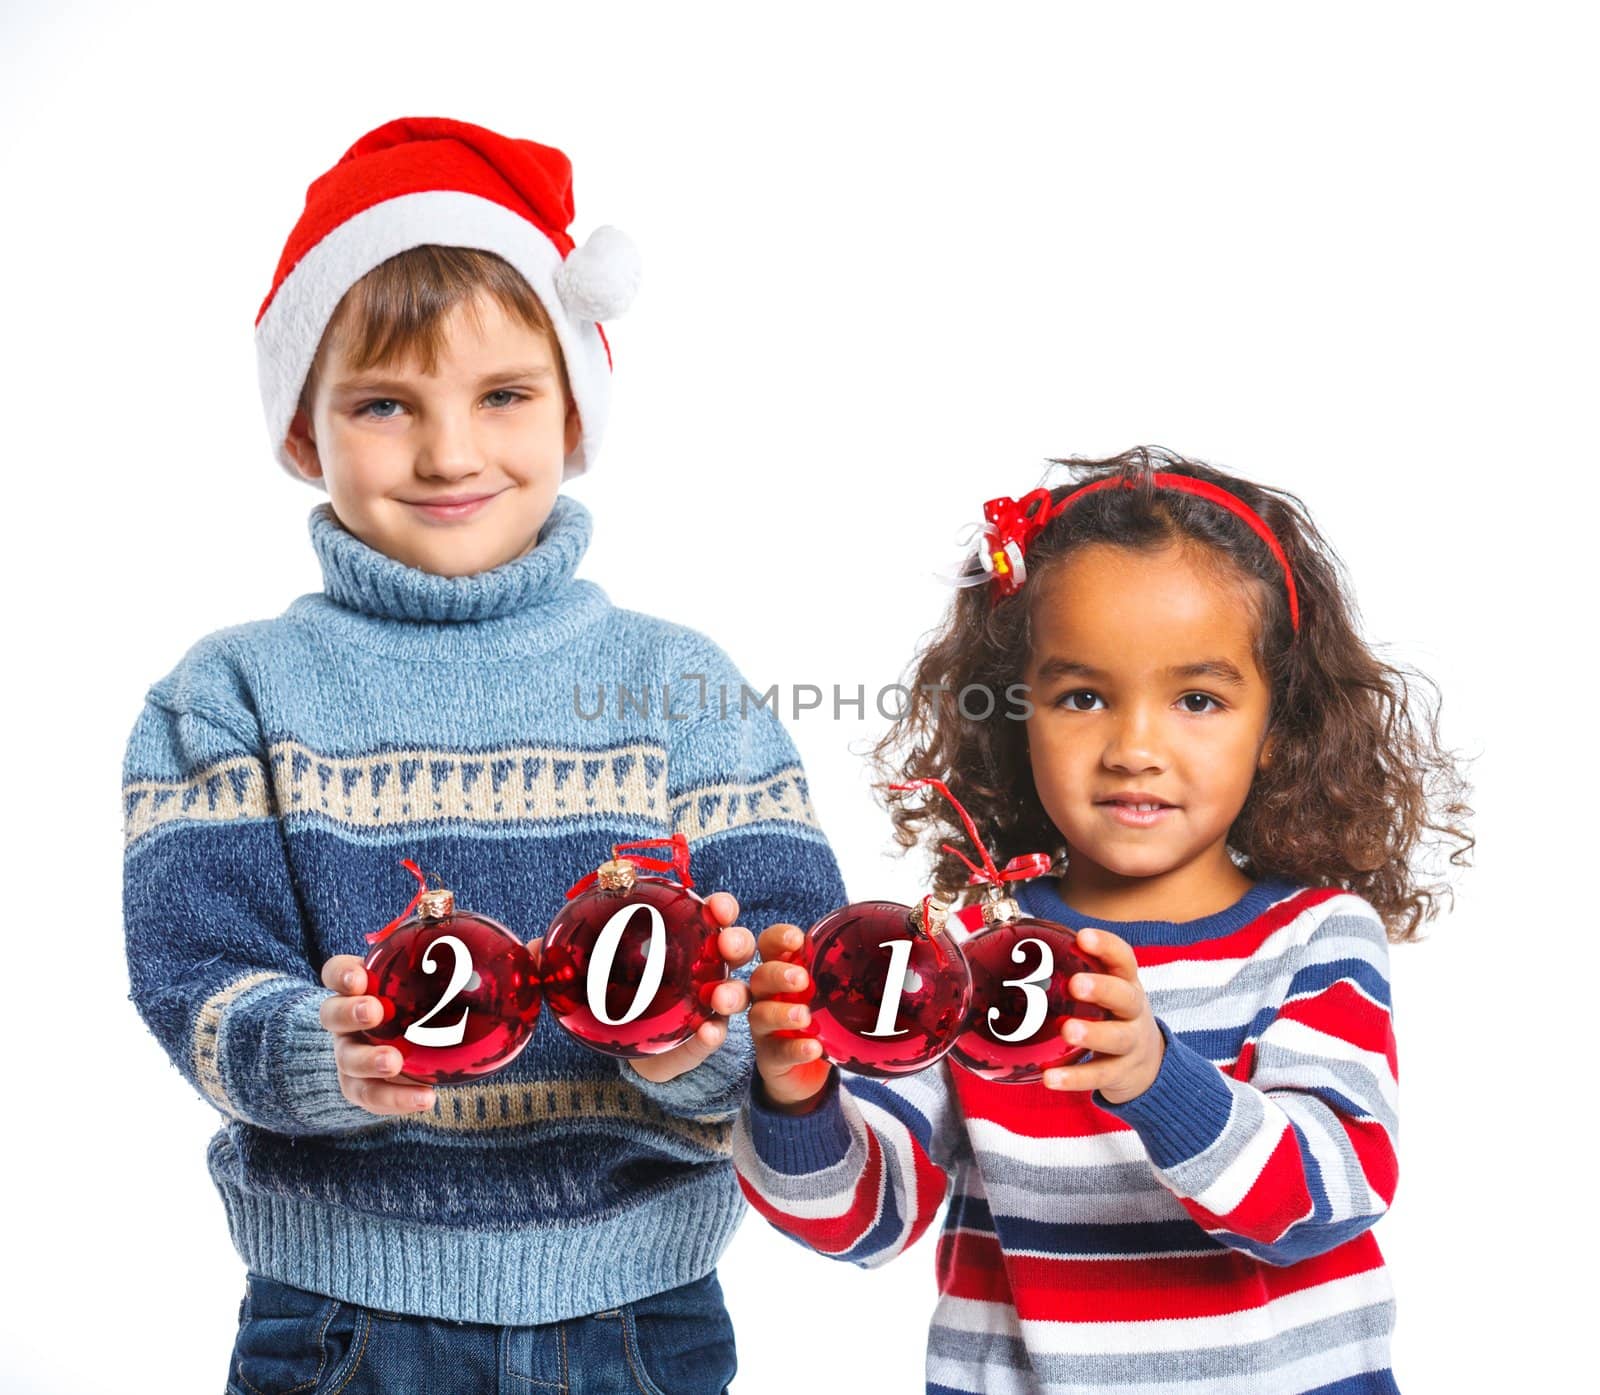 Christmas theme - Kids in Santa's hat holding a christmas ball with 2013 against a white background. Focus on the ball